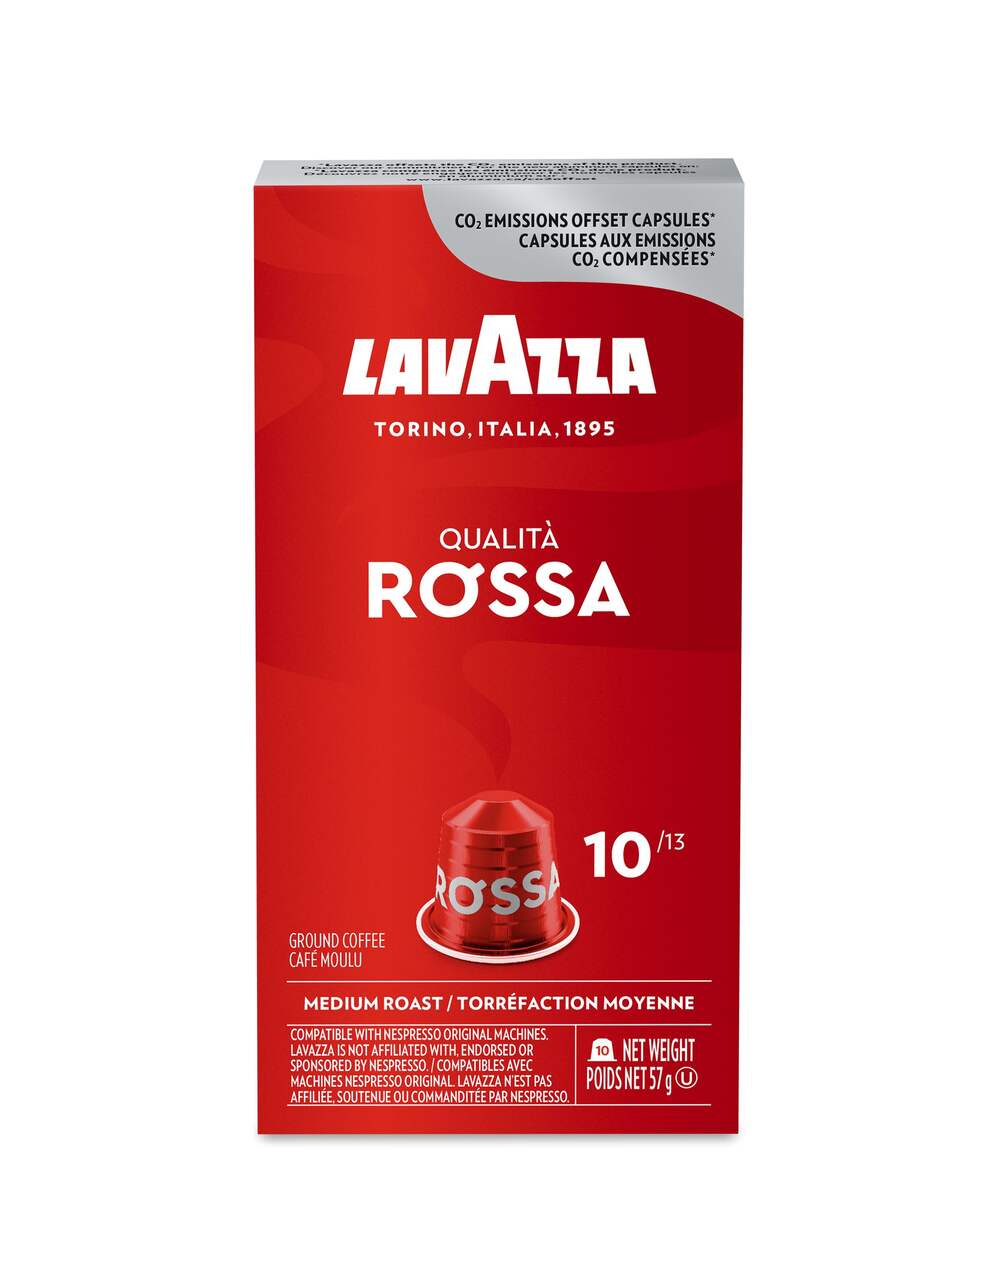 https://media-www.canadiantire.ca/product/living/food-drink/single-serve-beverages/1534326/lavazza-rossa-nespresso-compatible-capsules-10-ct-3265dc14-69e3-4c90-9a37-35375e53b076-jpgrendition.jpg?imdensity=1&imwidth=1244&impolicy=mZoom